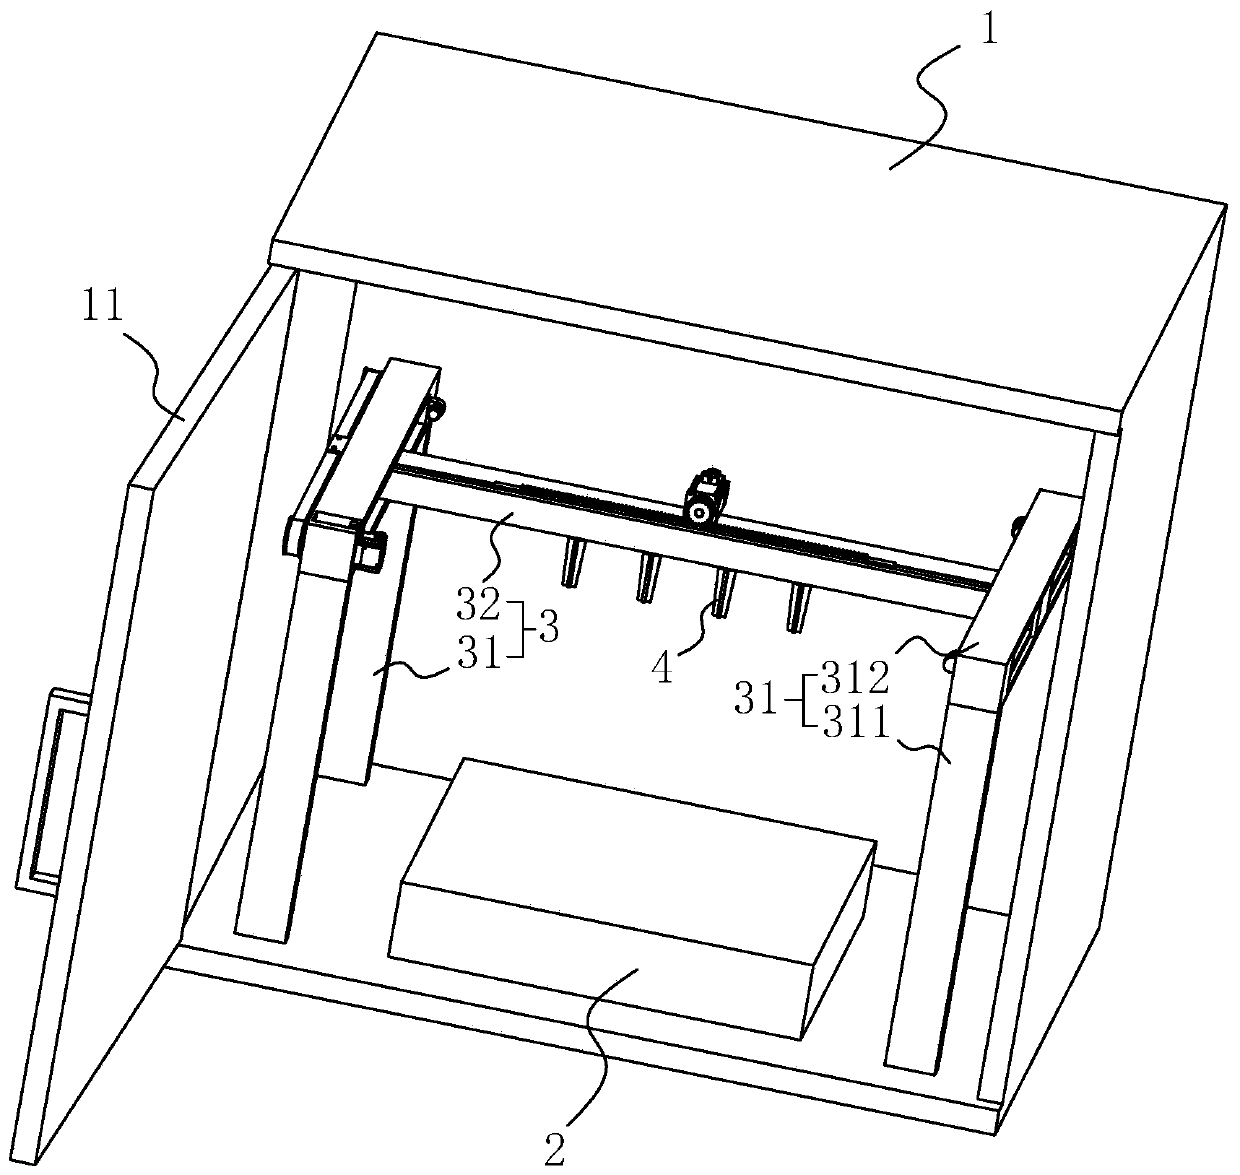 A test device for determining the electromagnetic properties of an object under test